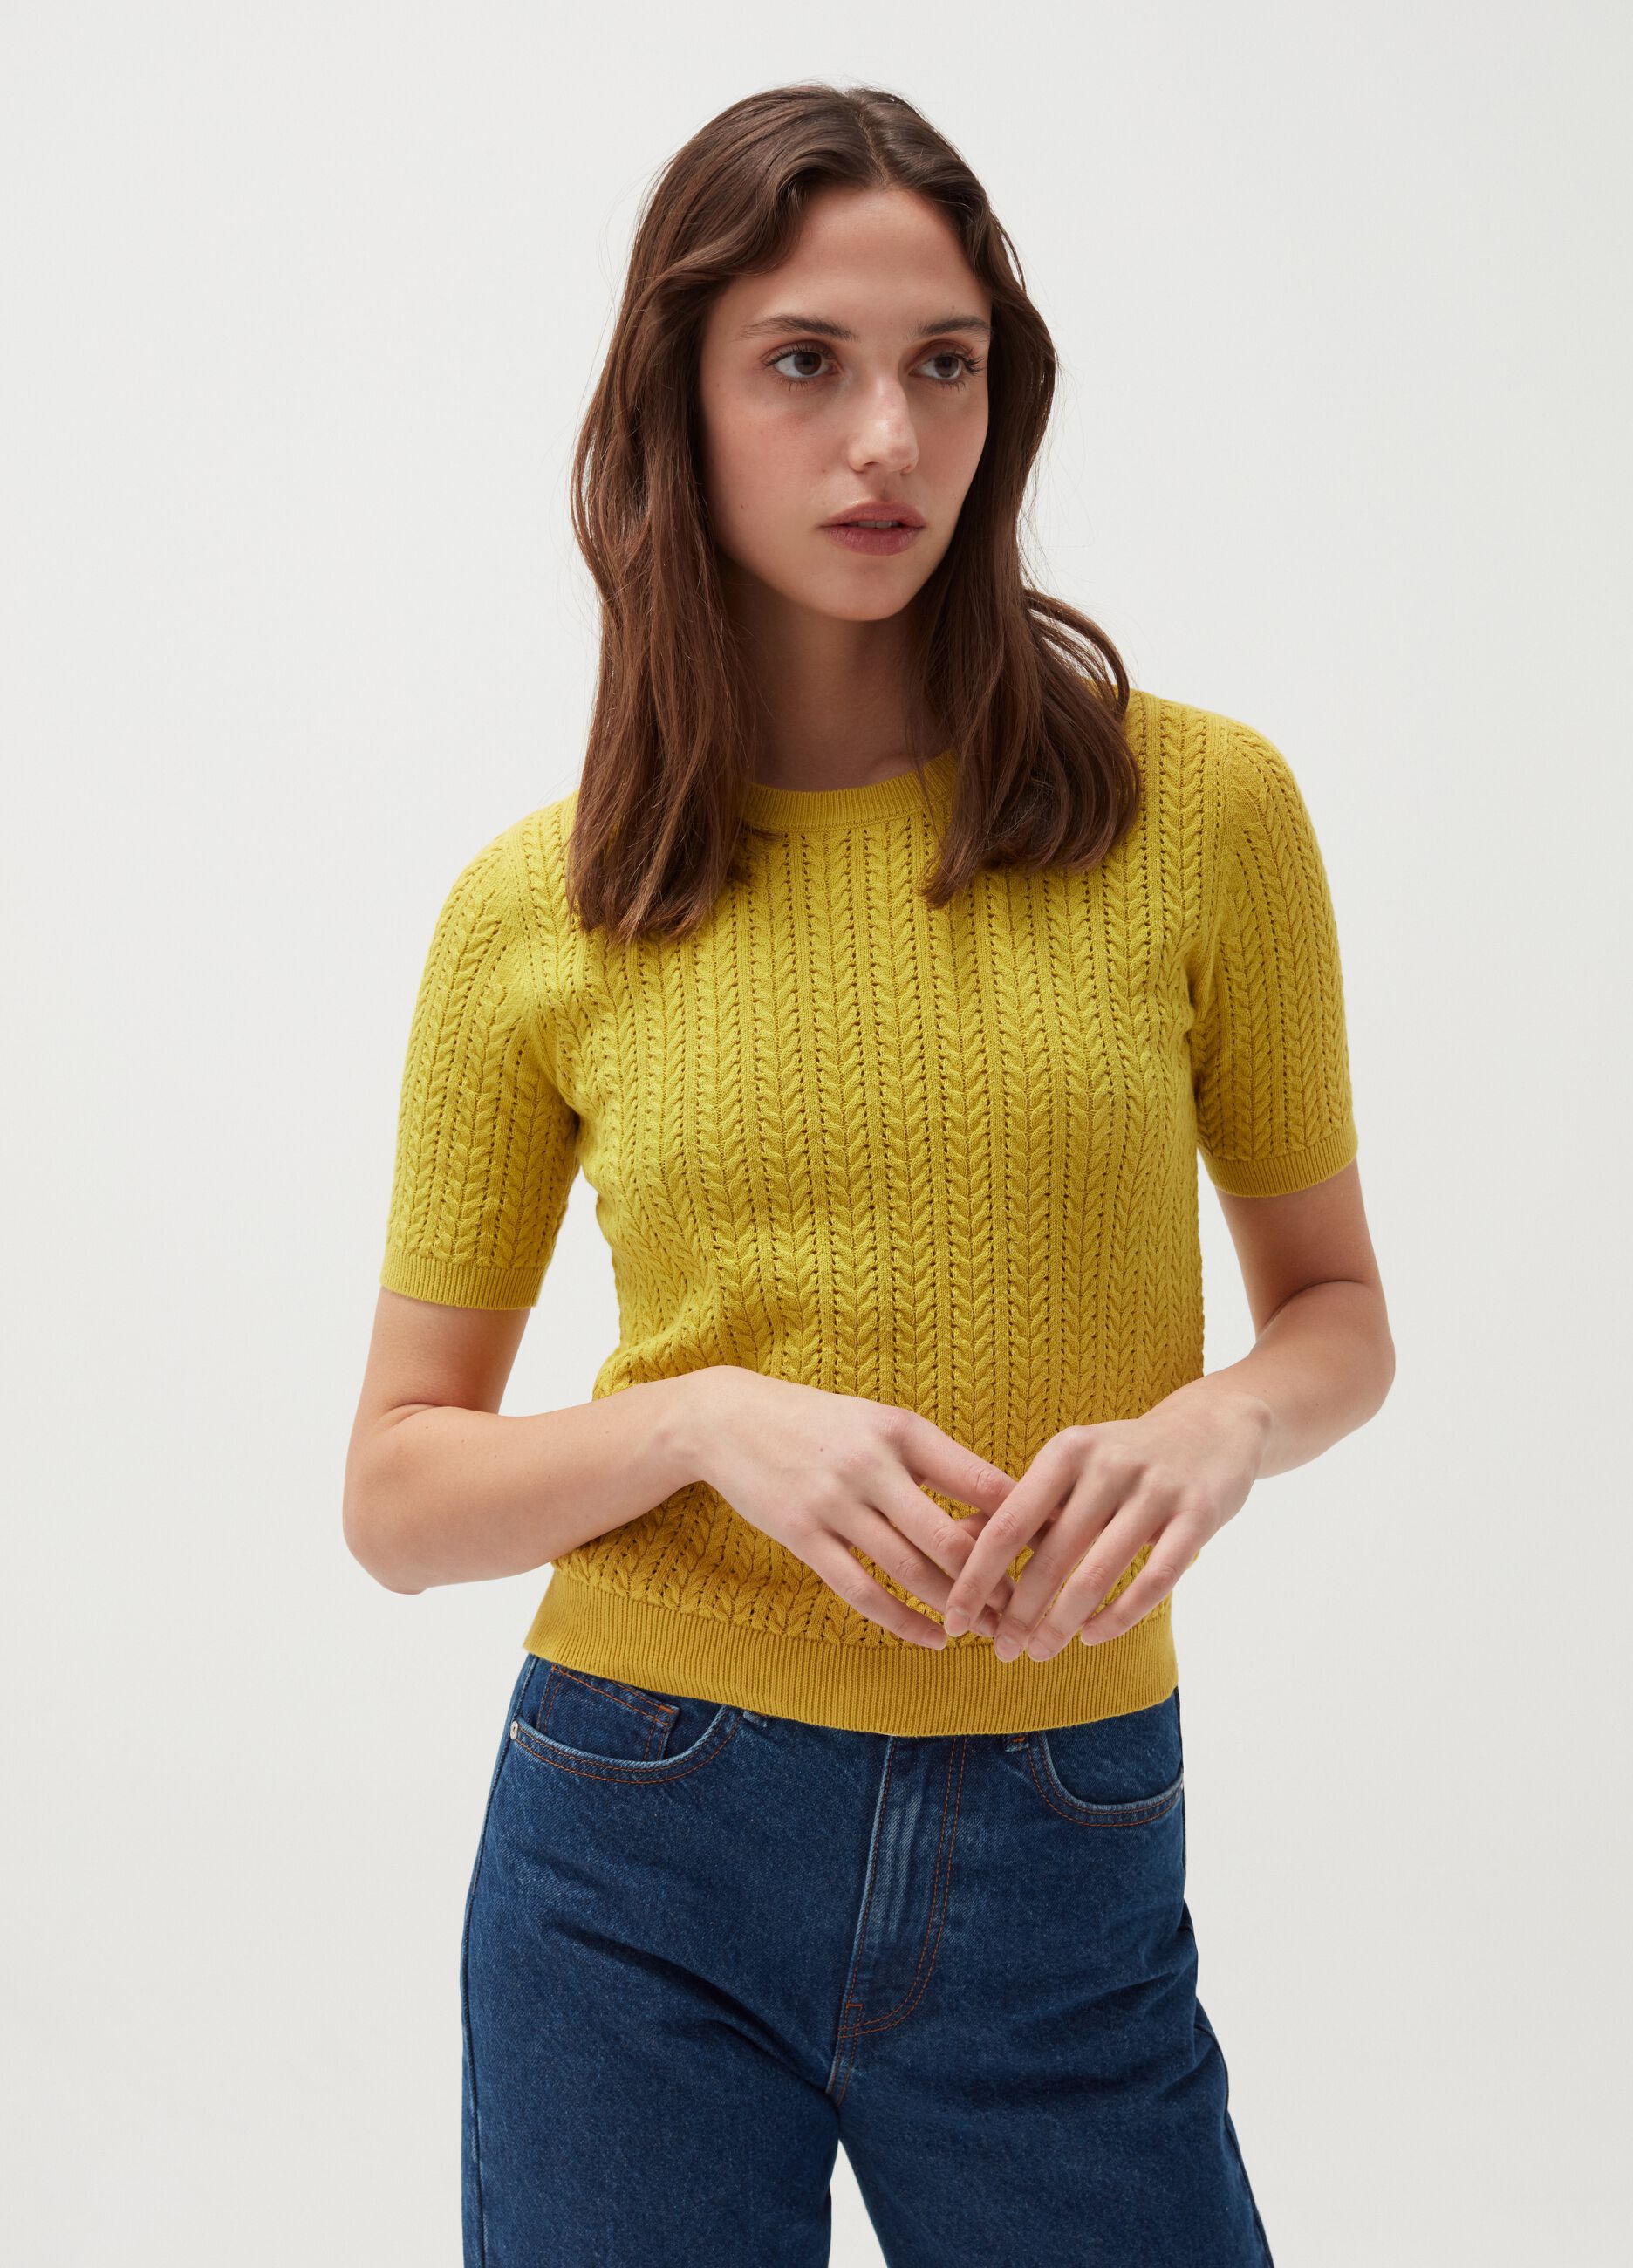 Pullover with short sleeves and braided motif